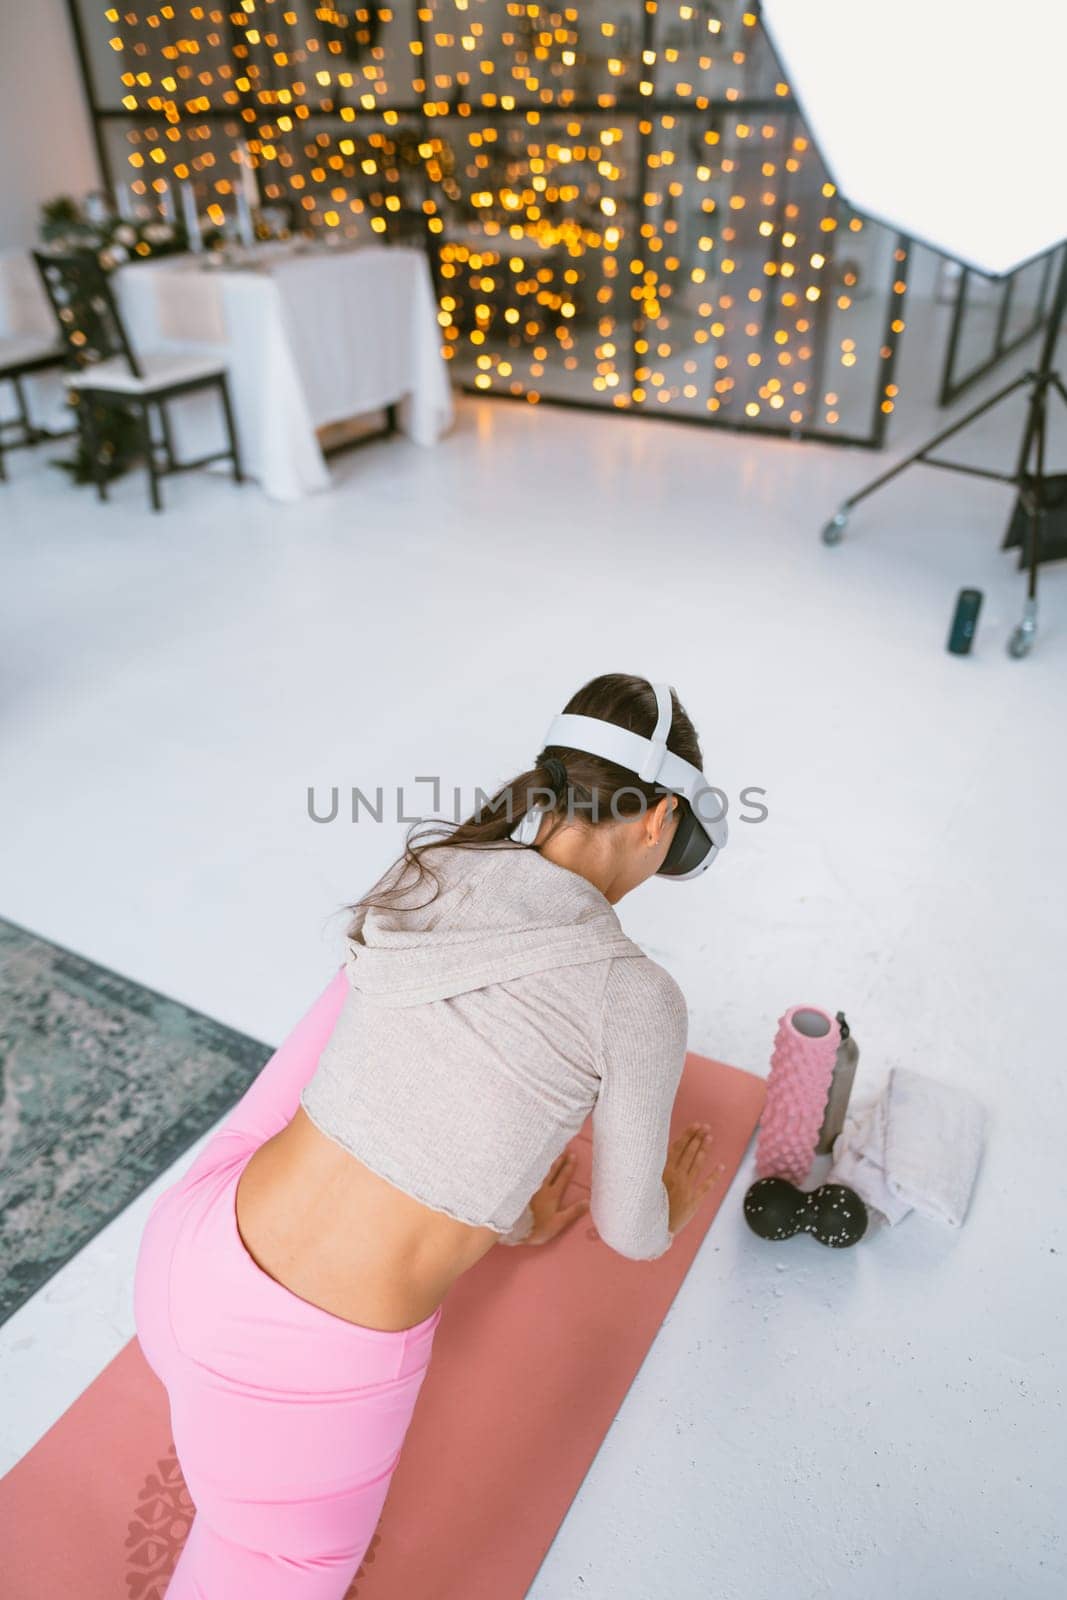 Arm warm-ups as part of home exercise routines with a virtual reality headset during the Christmas holidays. High quality photo